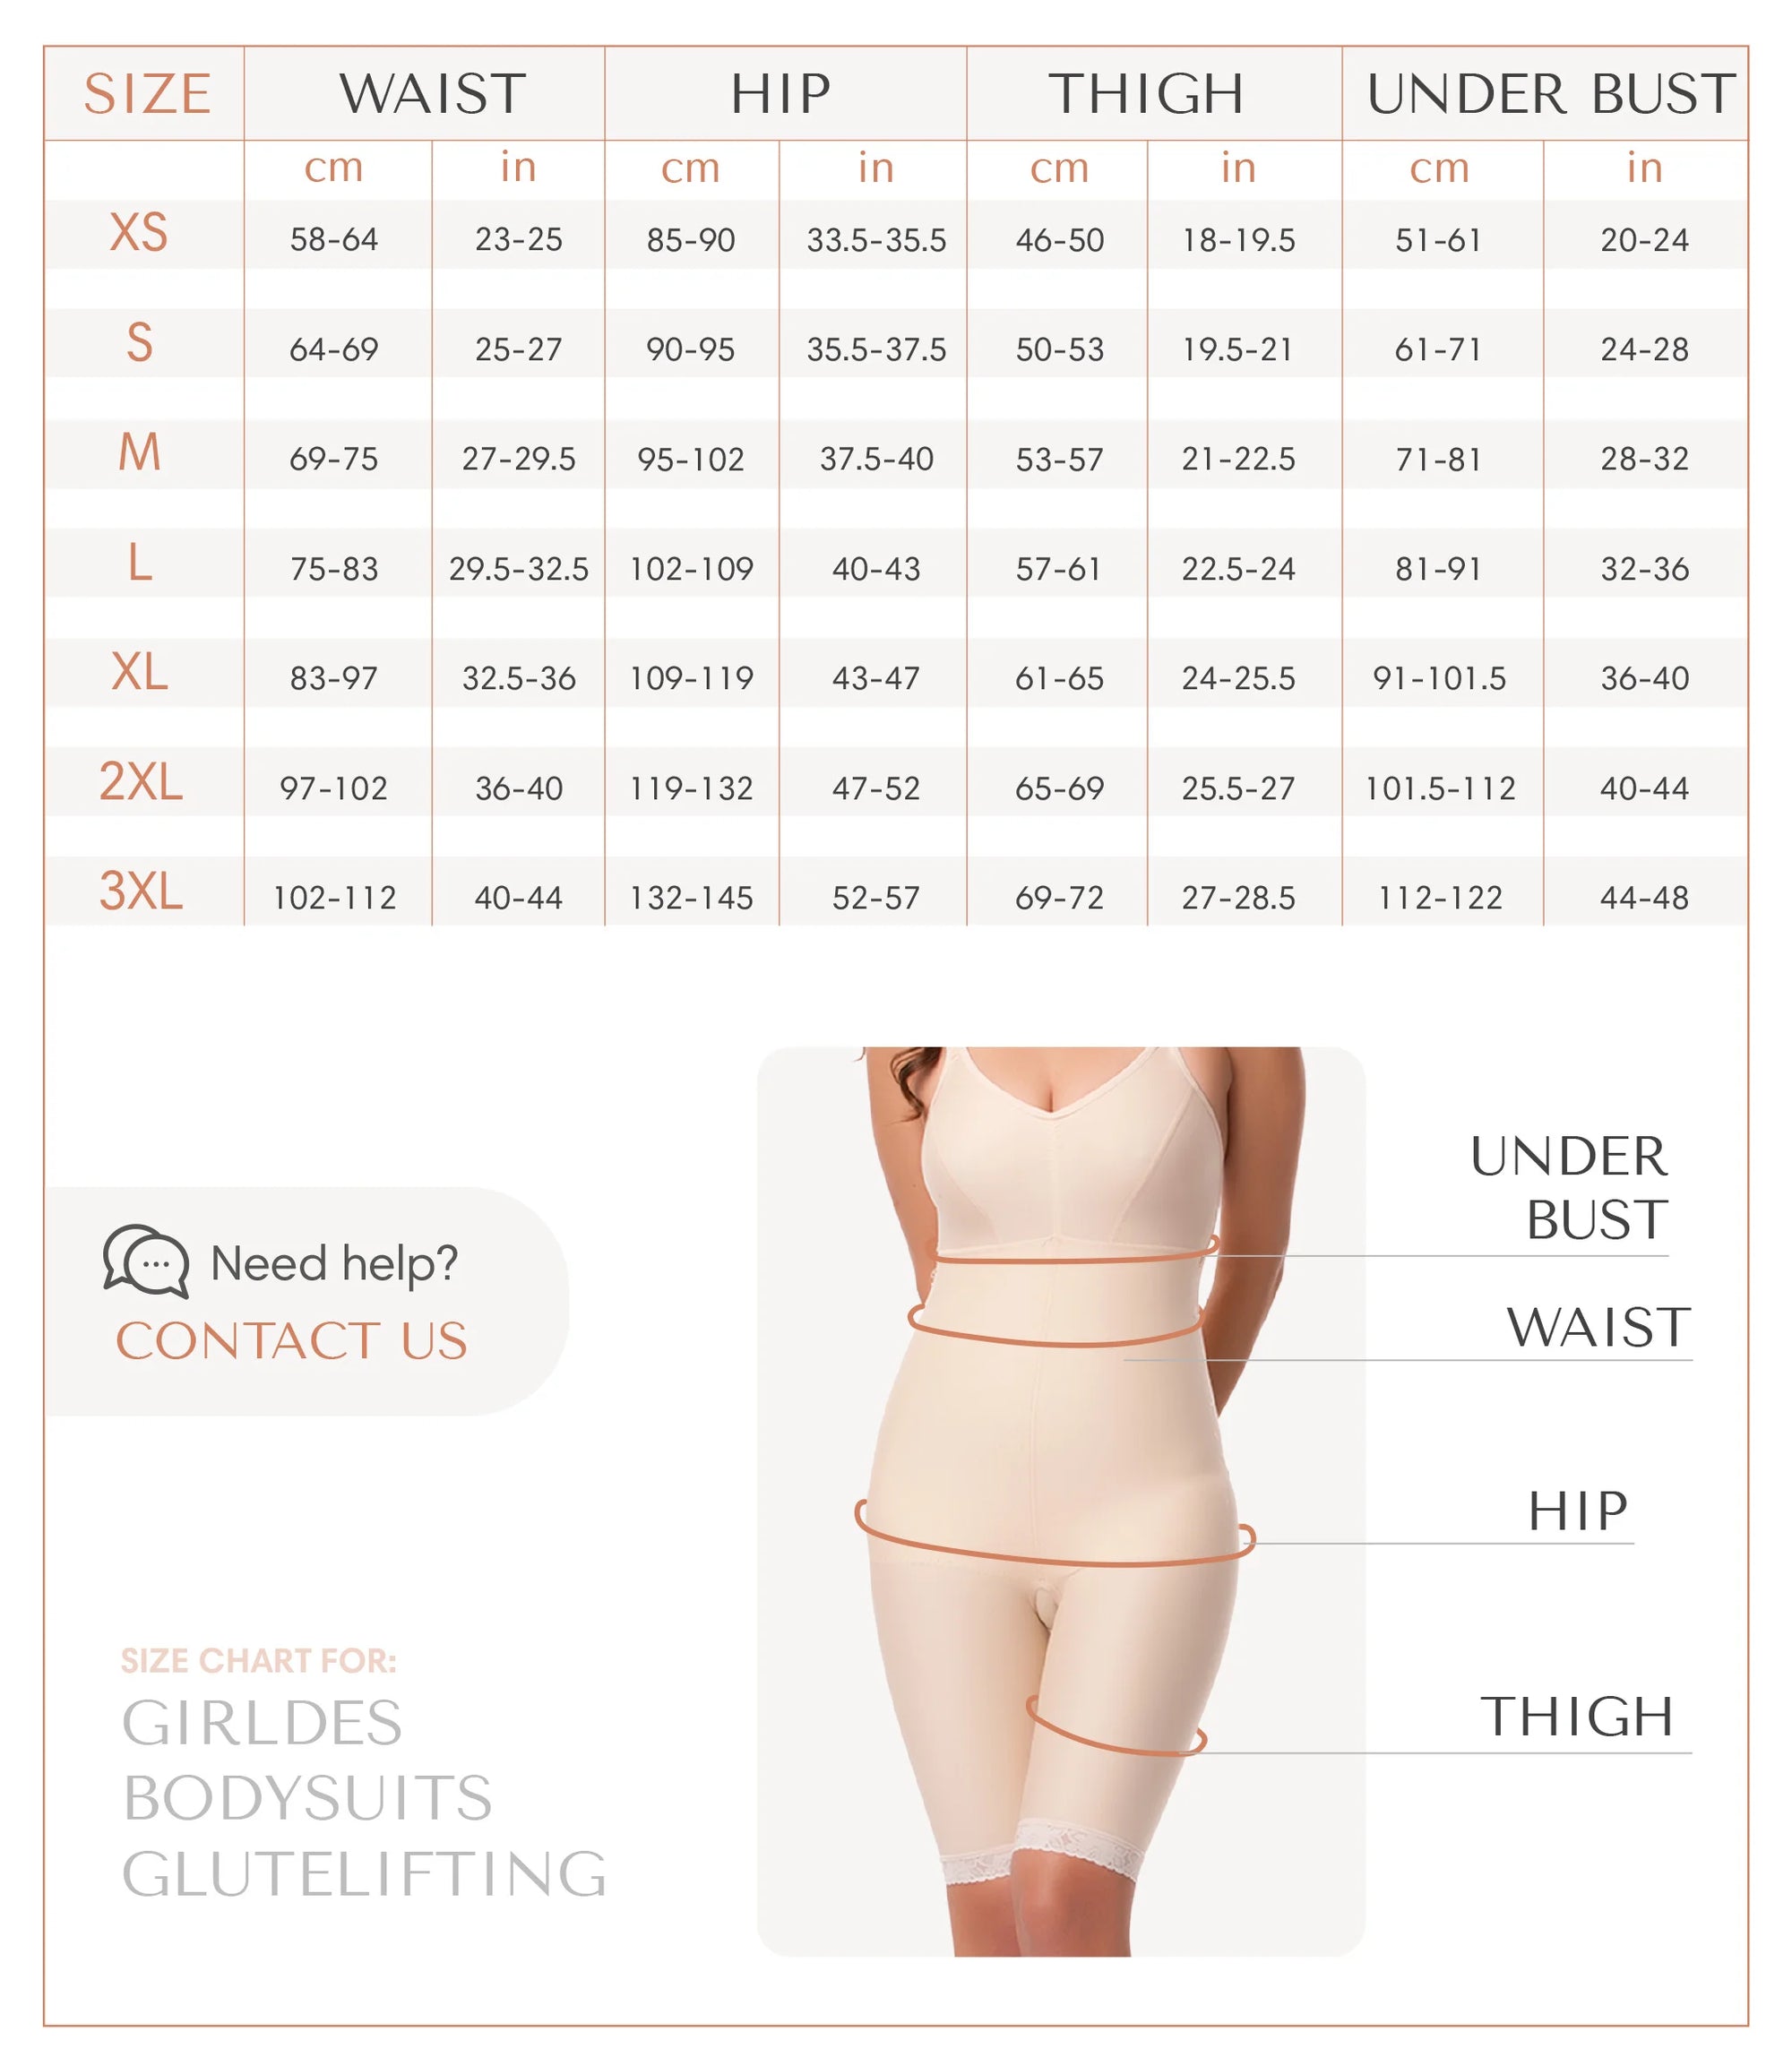 2nd Stage Ankle Length Compression Bodysuit (BS08)